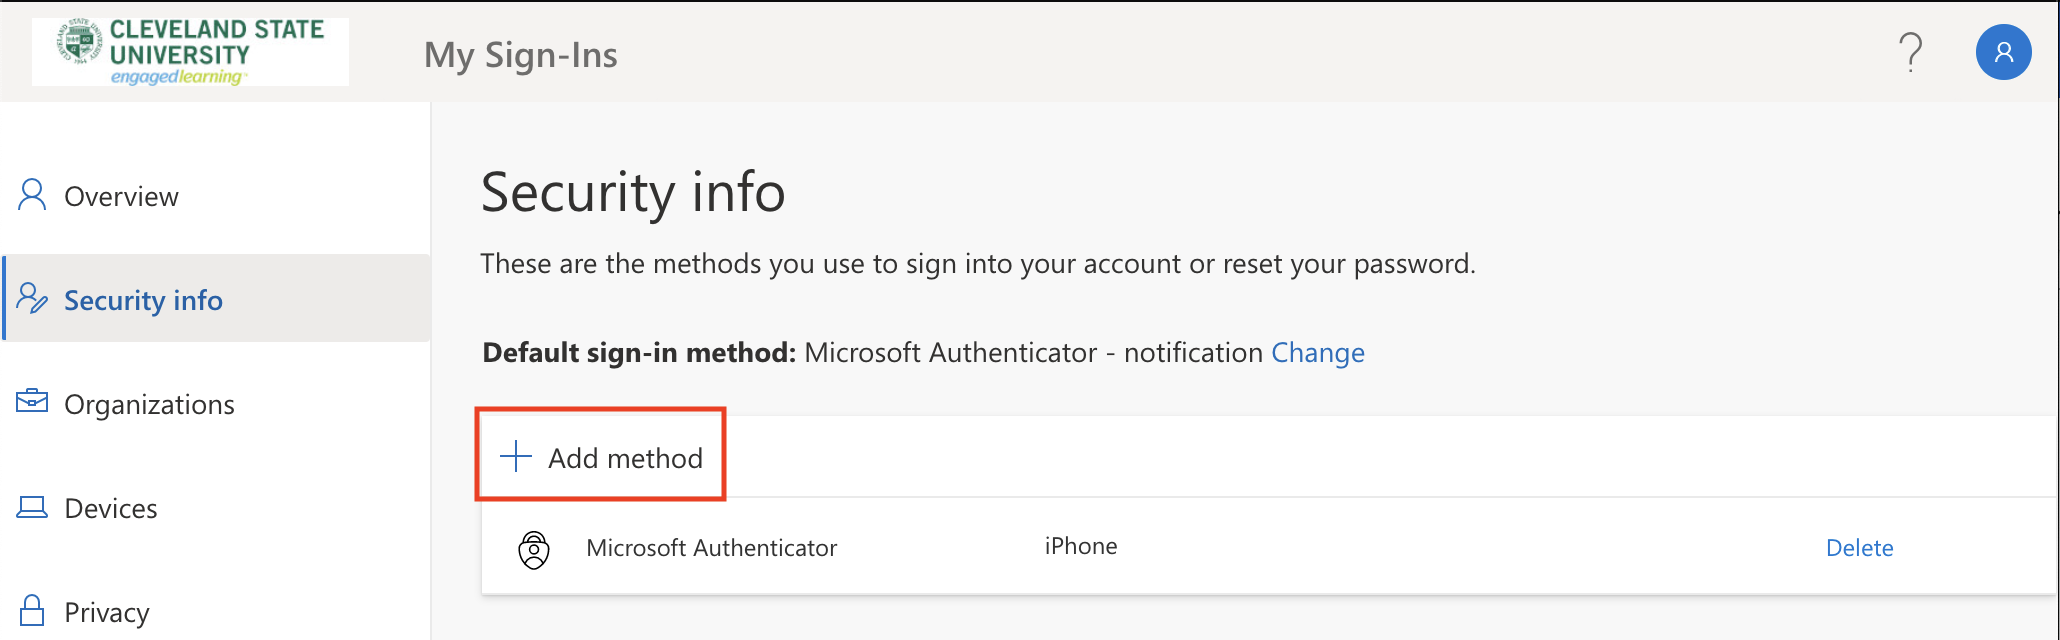 Screenshot of Microsoft MFA Security Info screen with the Add method button emphasized